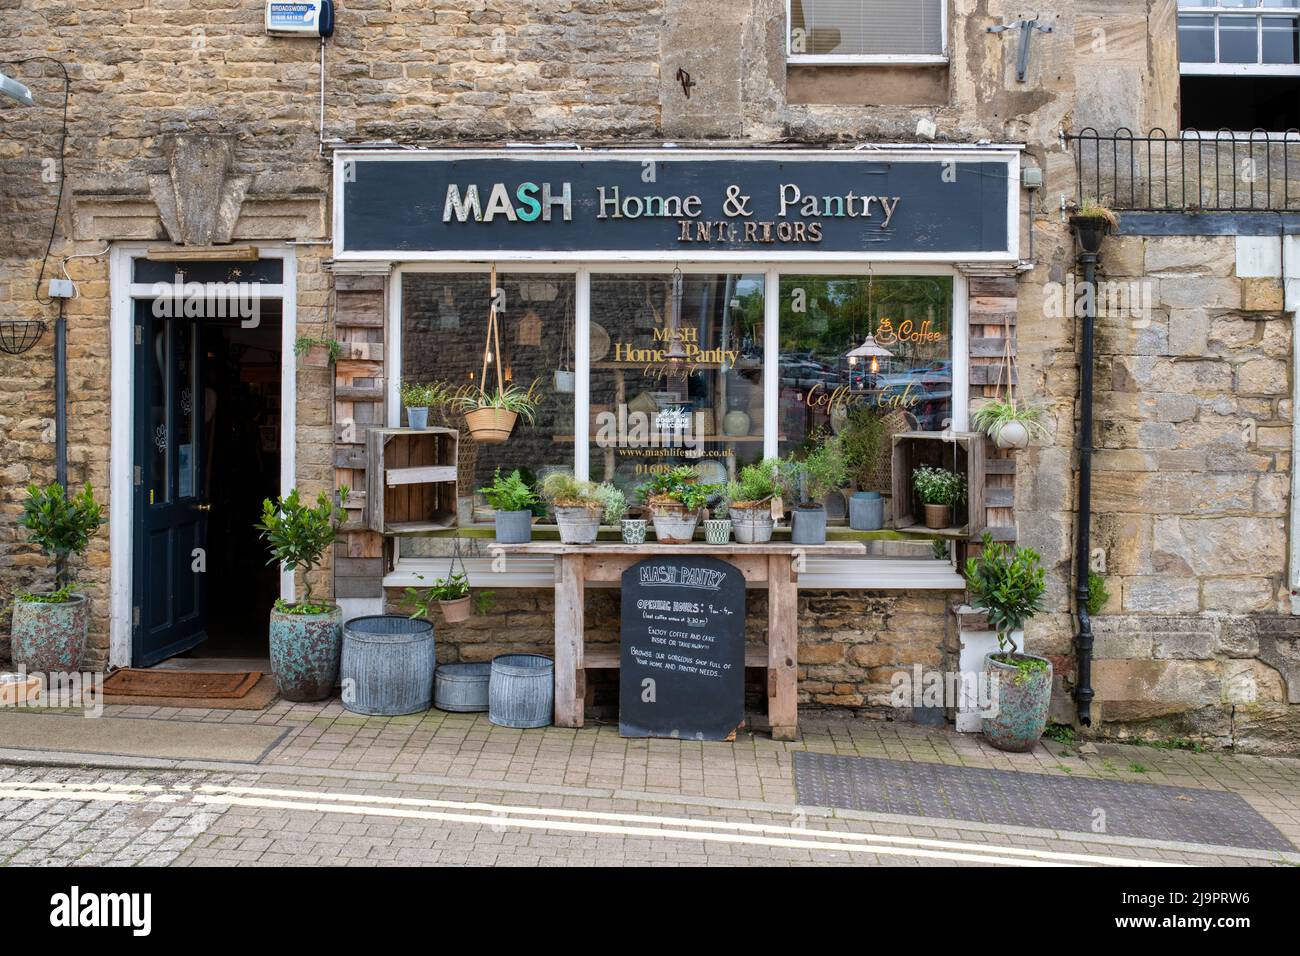 Mash Home e Pantry Shop a Chipping Norton. Cotswolds, Oxfordshire, Inghilterra Foto Stock